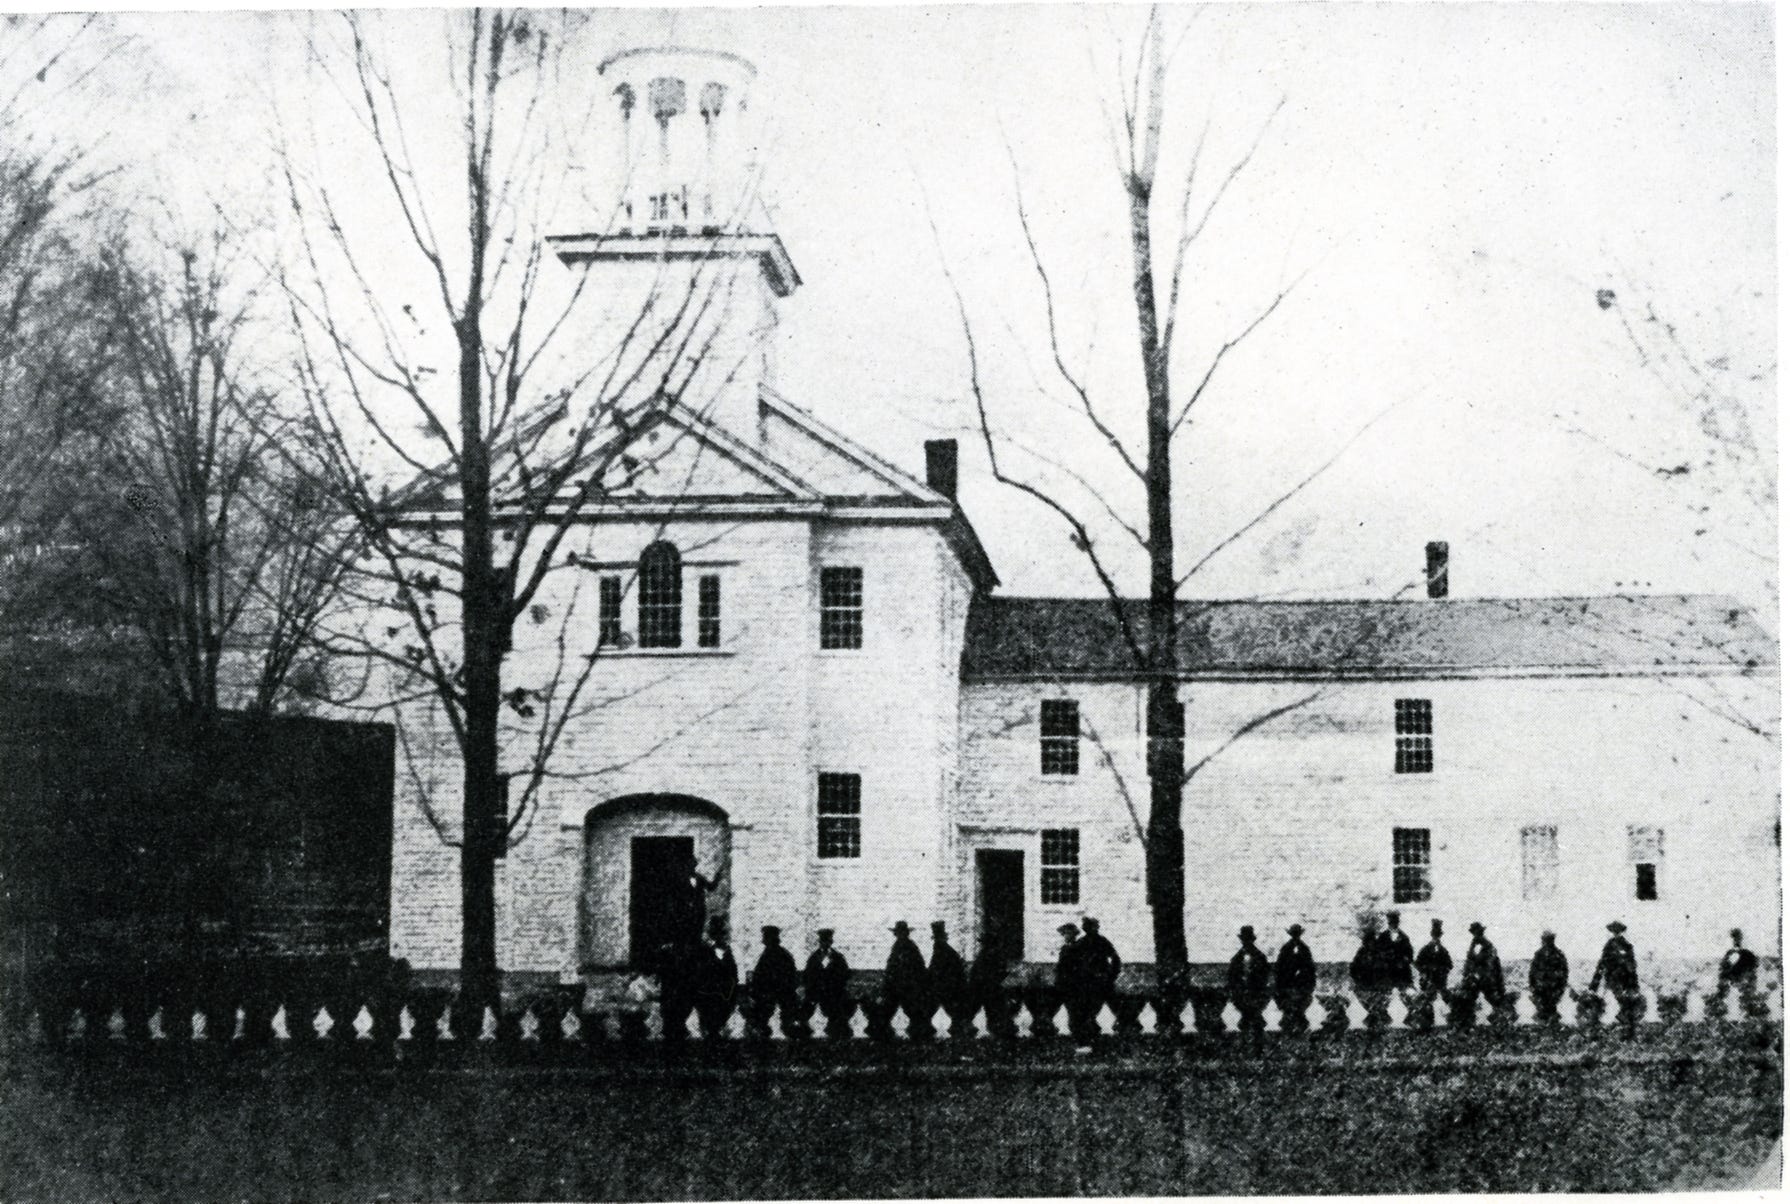 Castleton Medical College as seen in 1855, when it was still on Castleton's Main Street, before it was moved to the campus of Castleton University 10 years later.